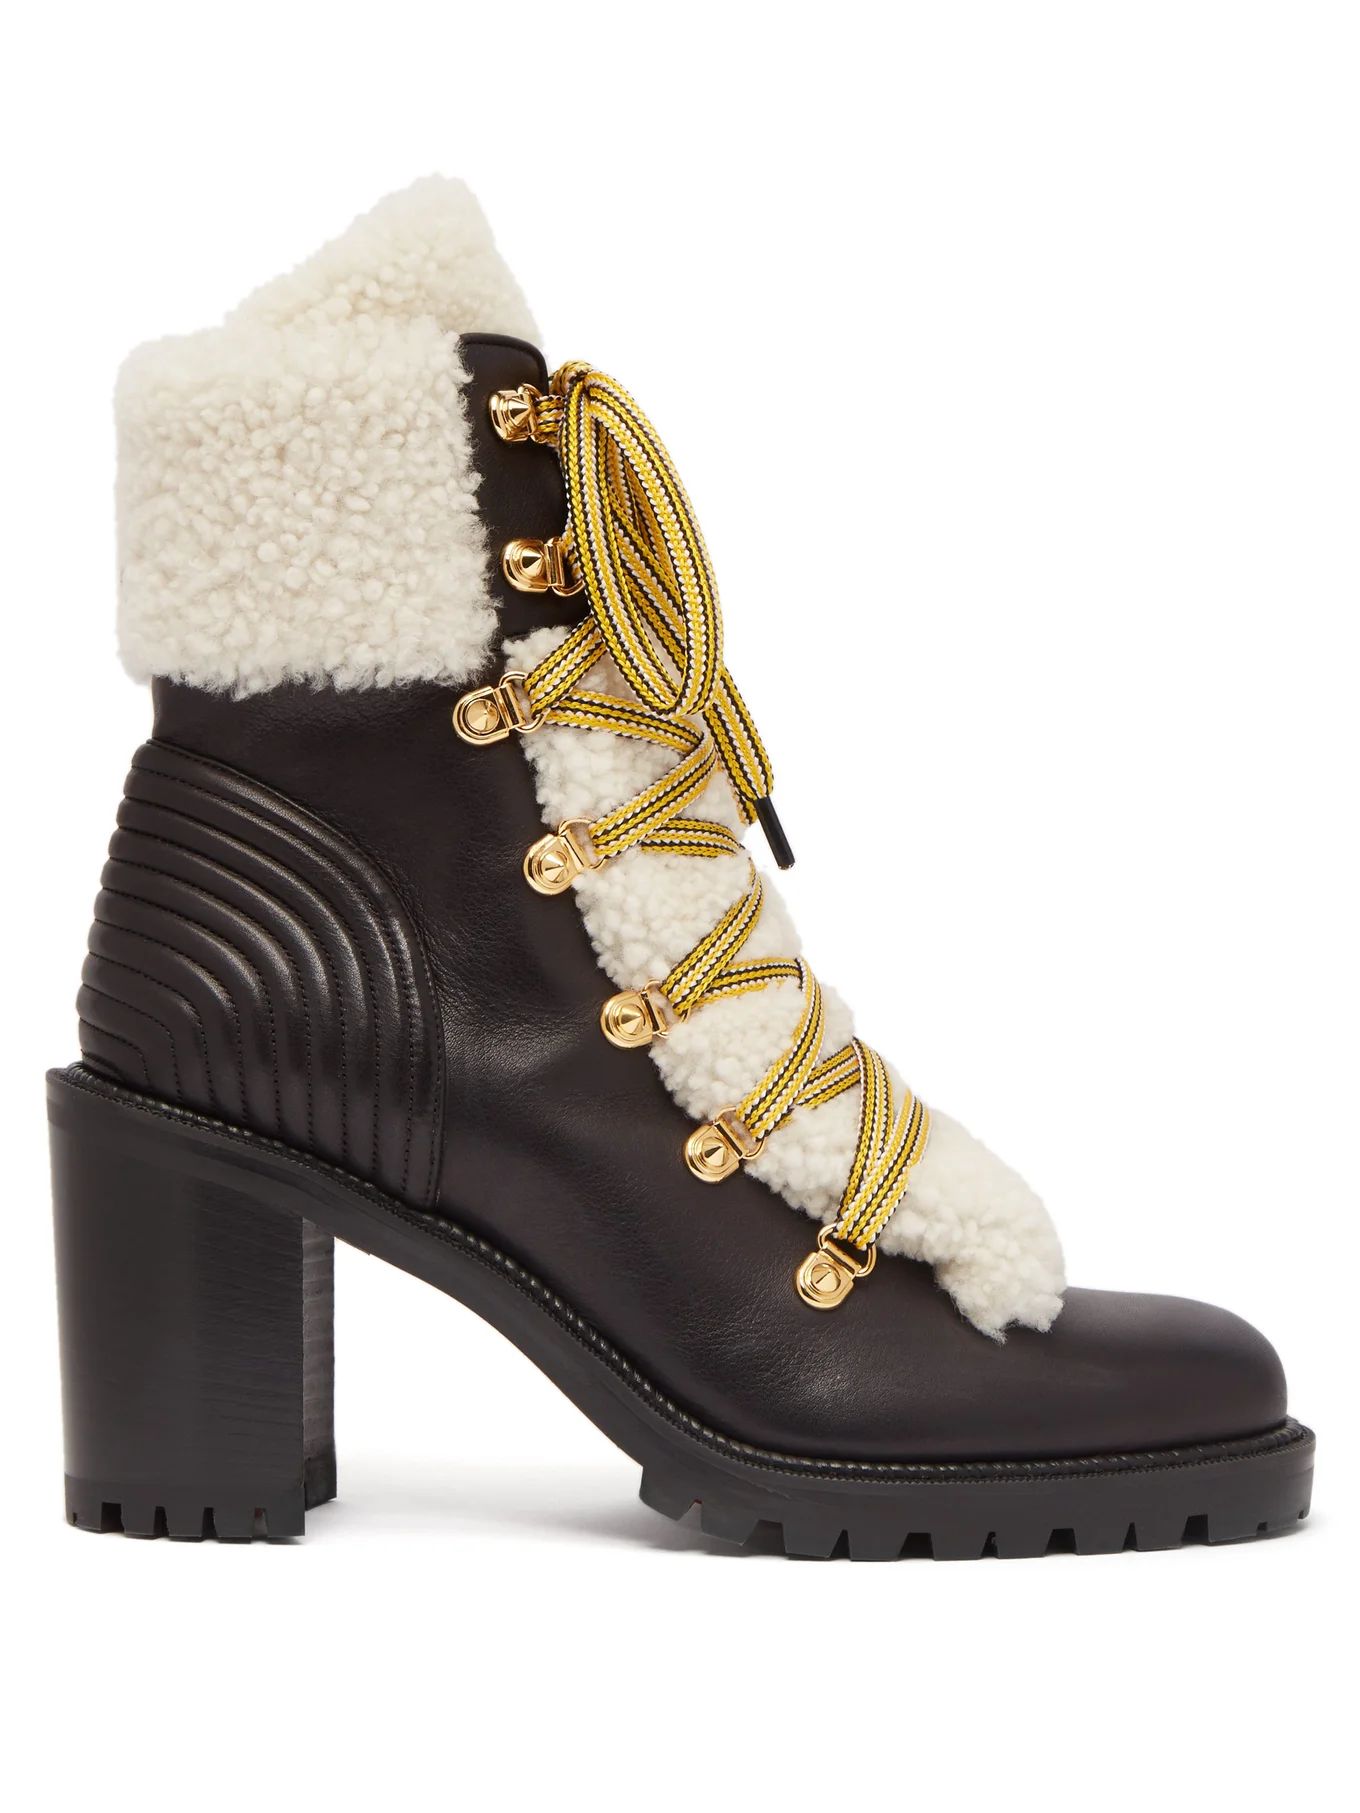 Yetita 70 shearling-trimmed leather ankle boots | Christian Louboutin | Matches (US)